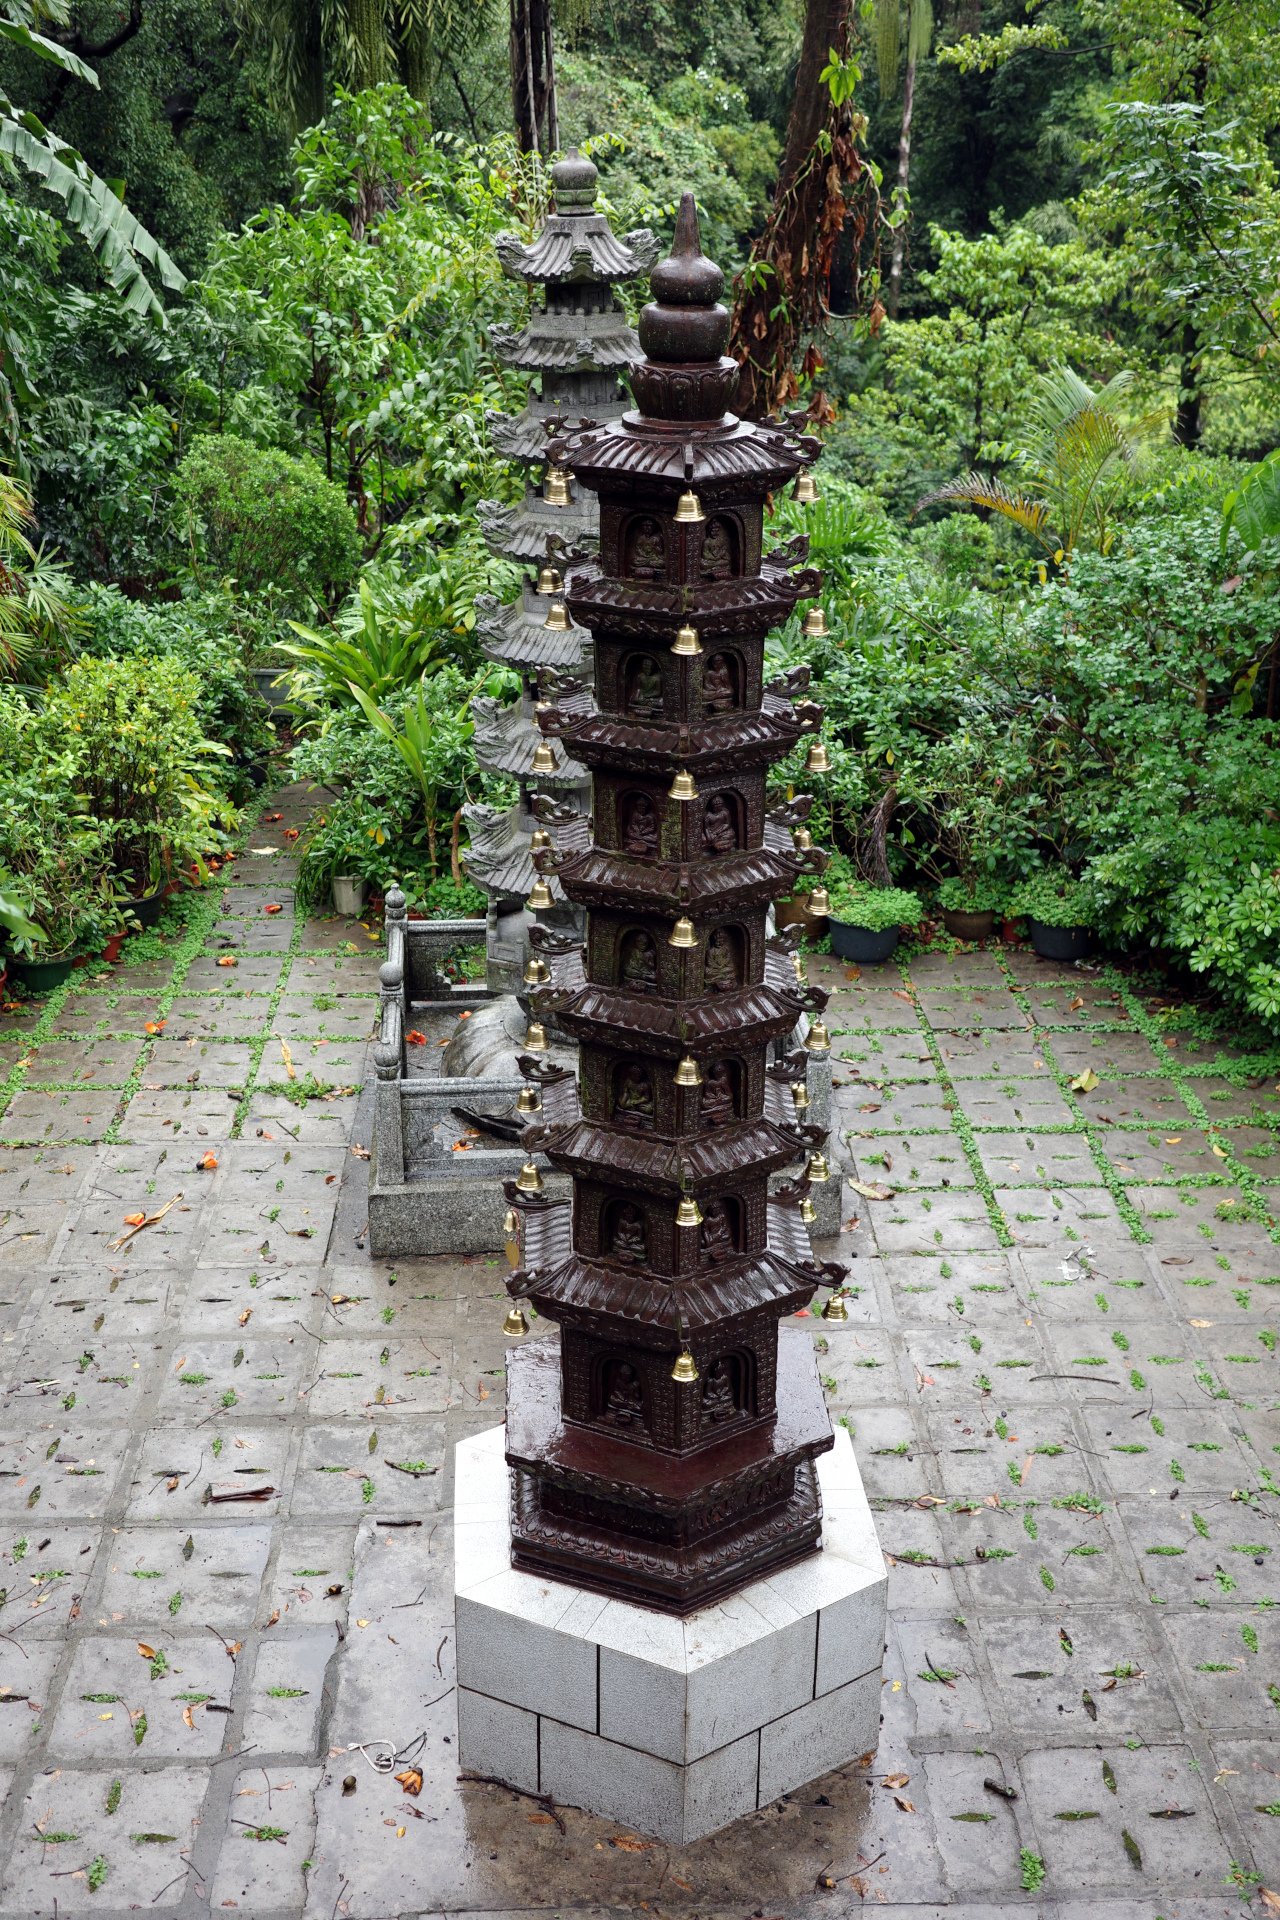 A small pagoda in the monastery